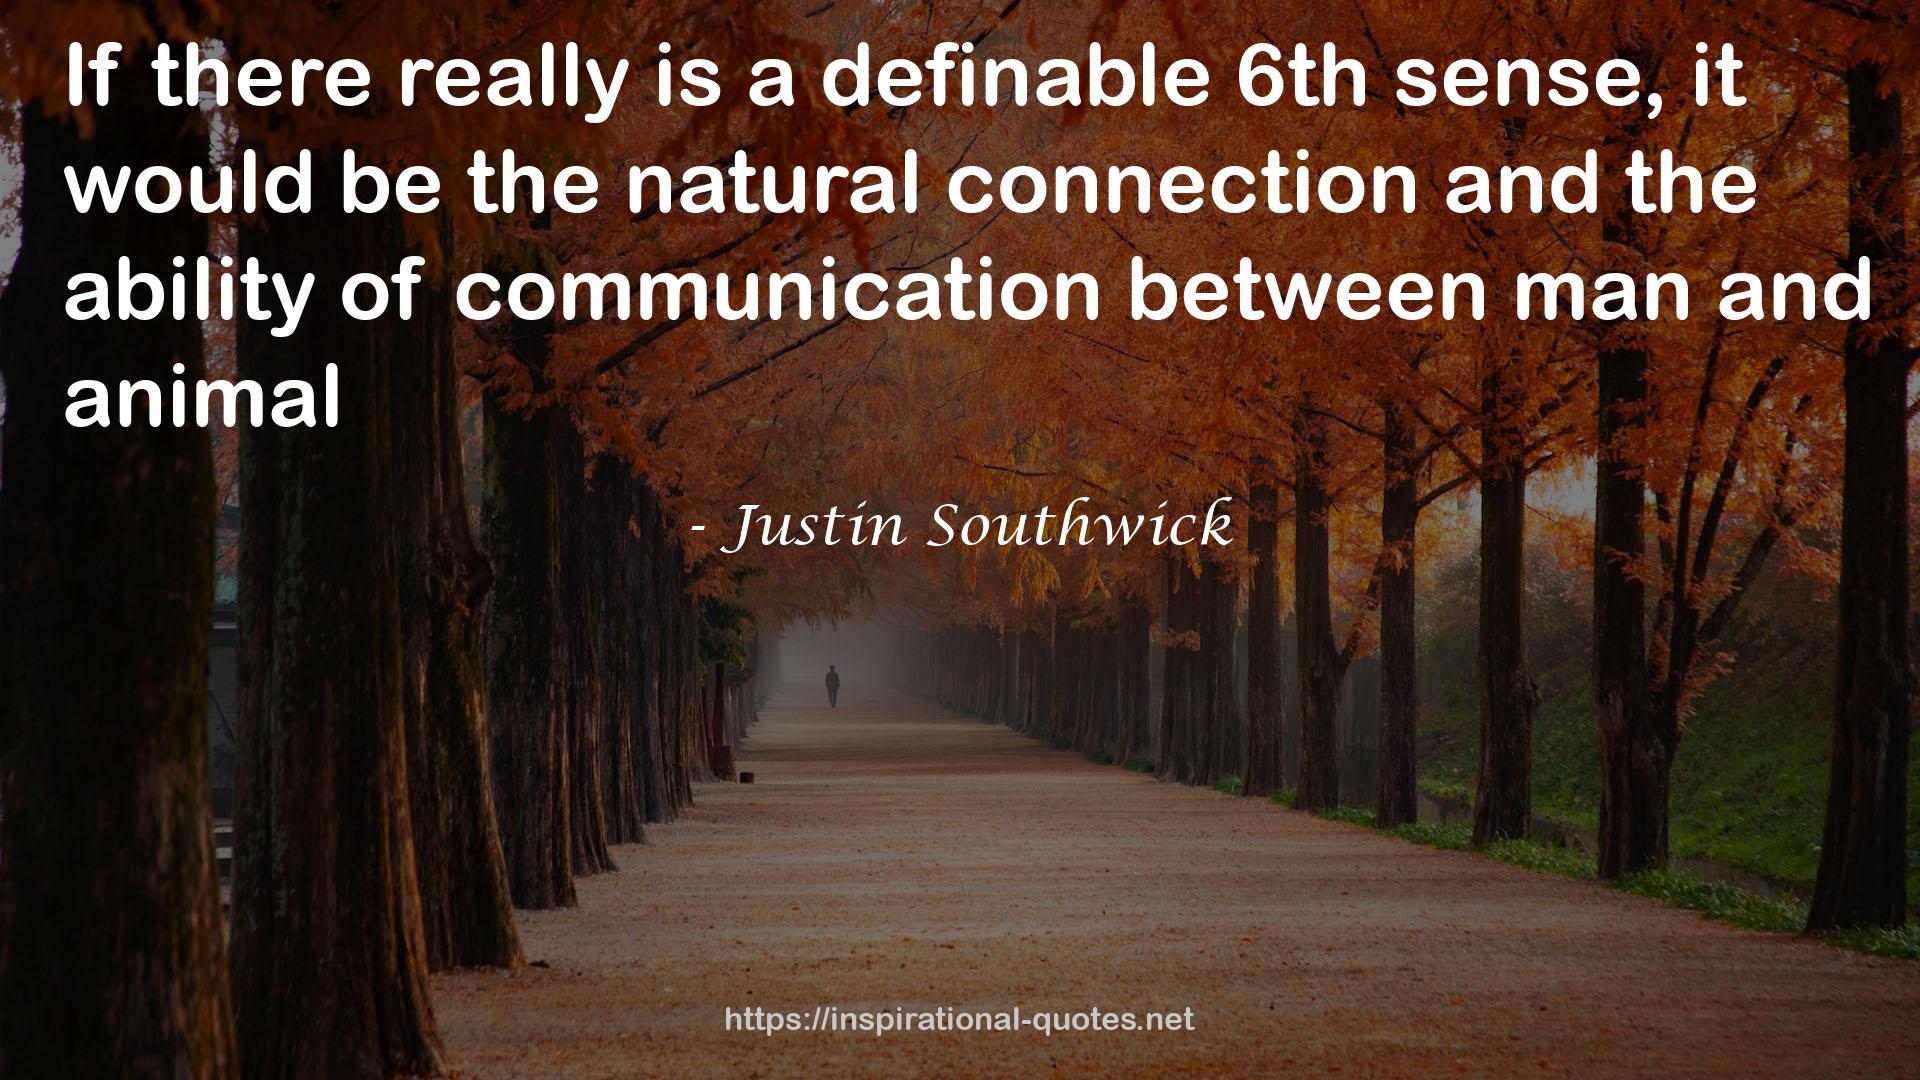 Justin Southwick QUOTES